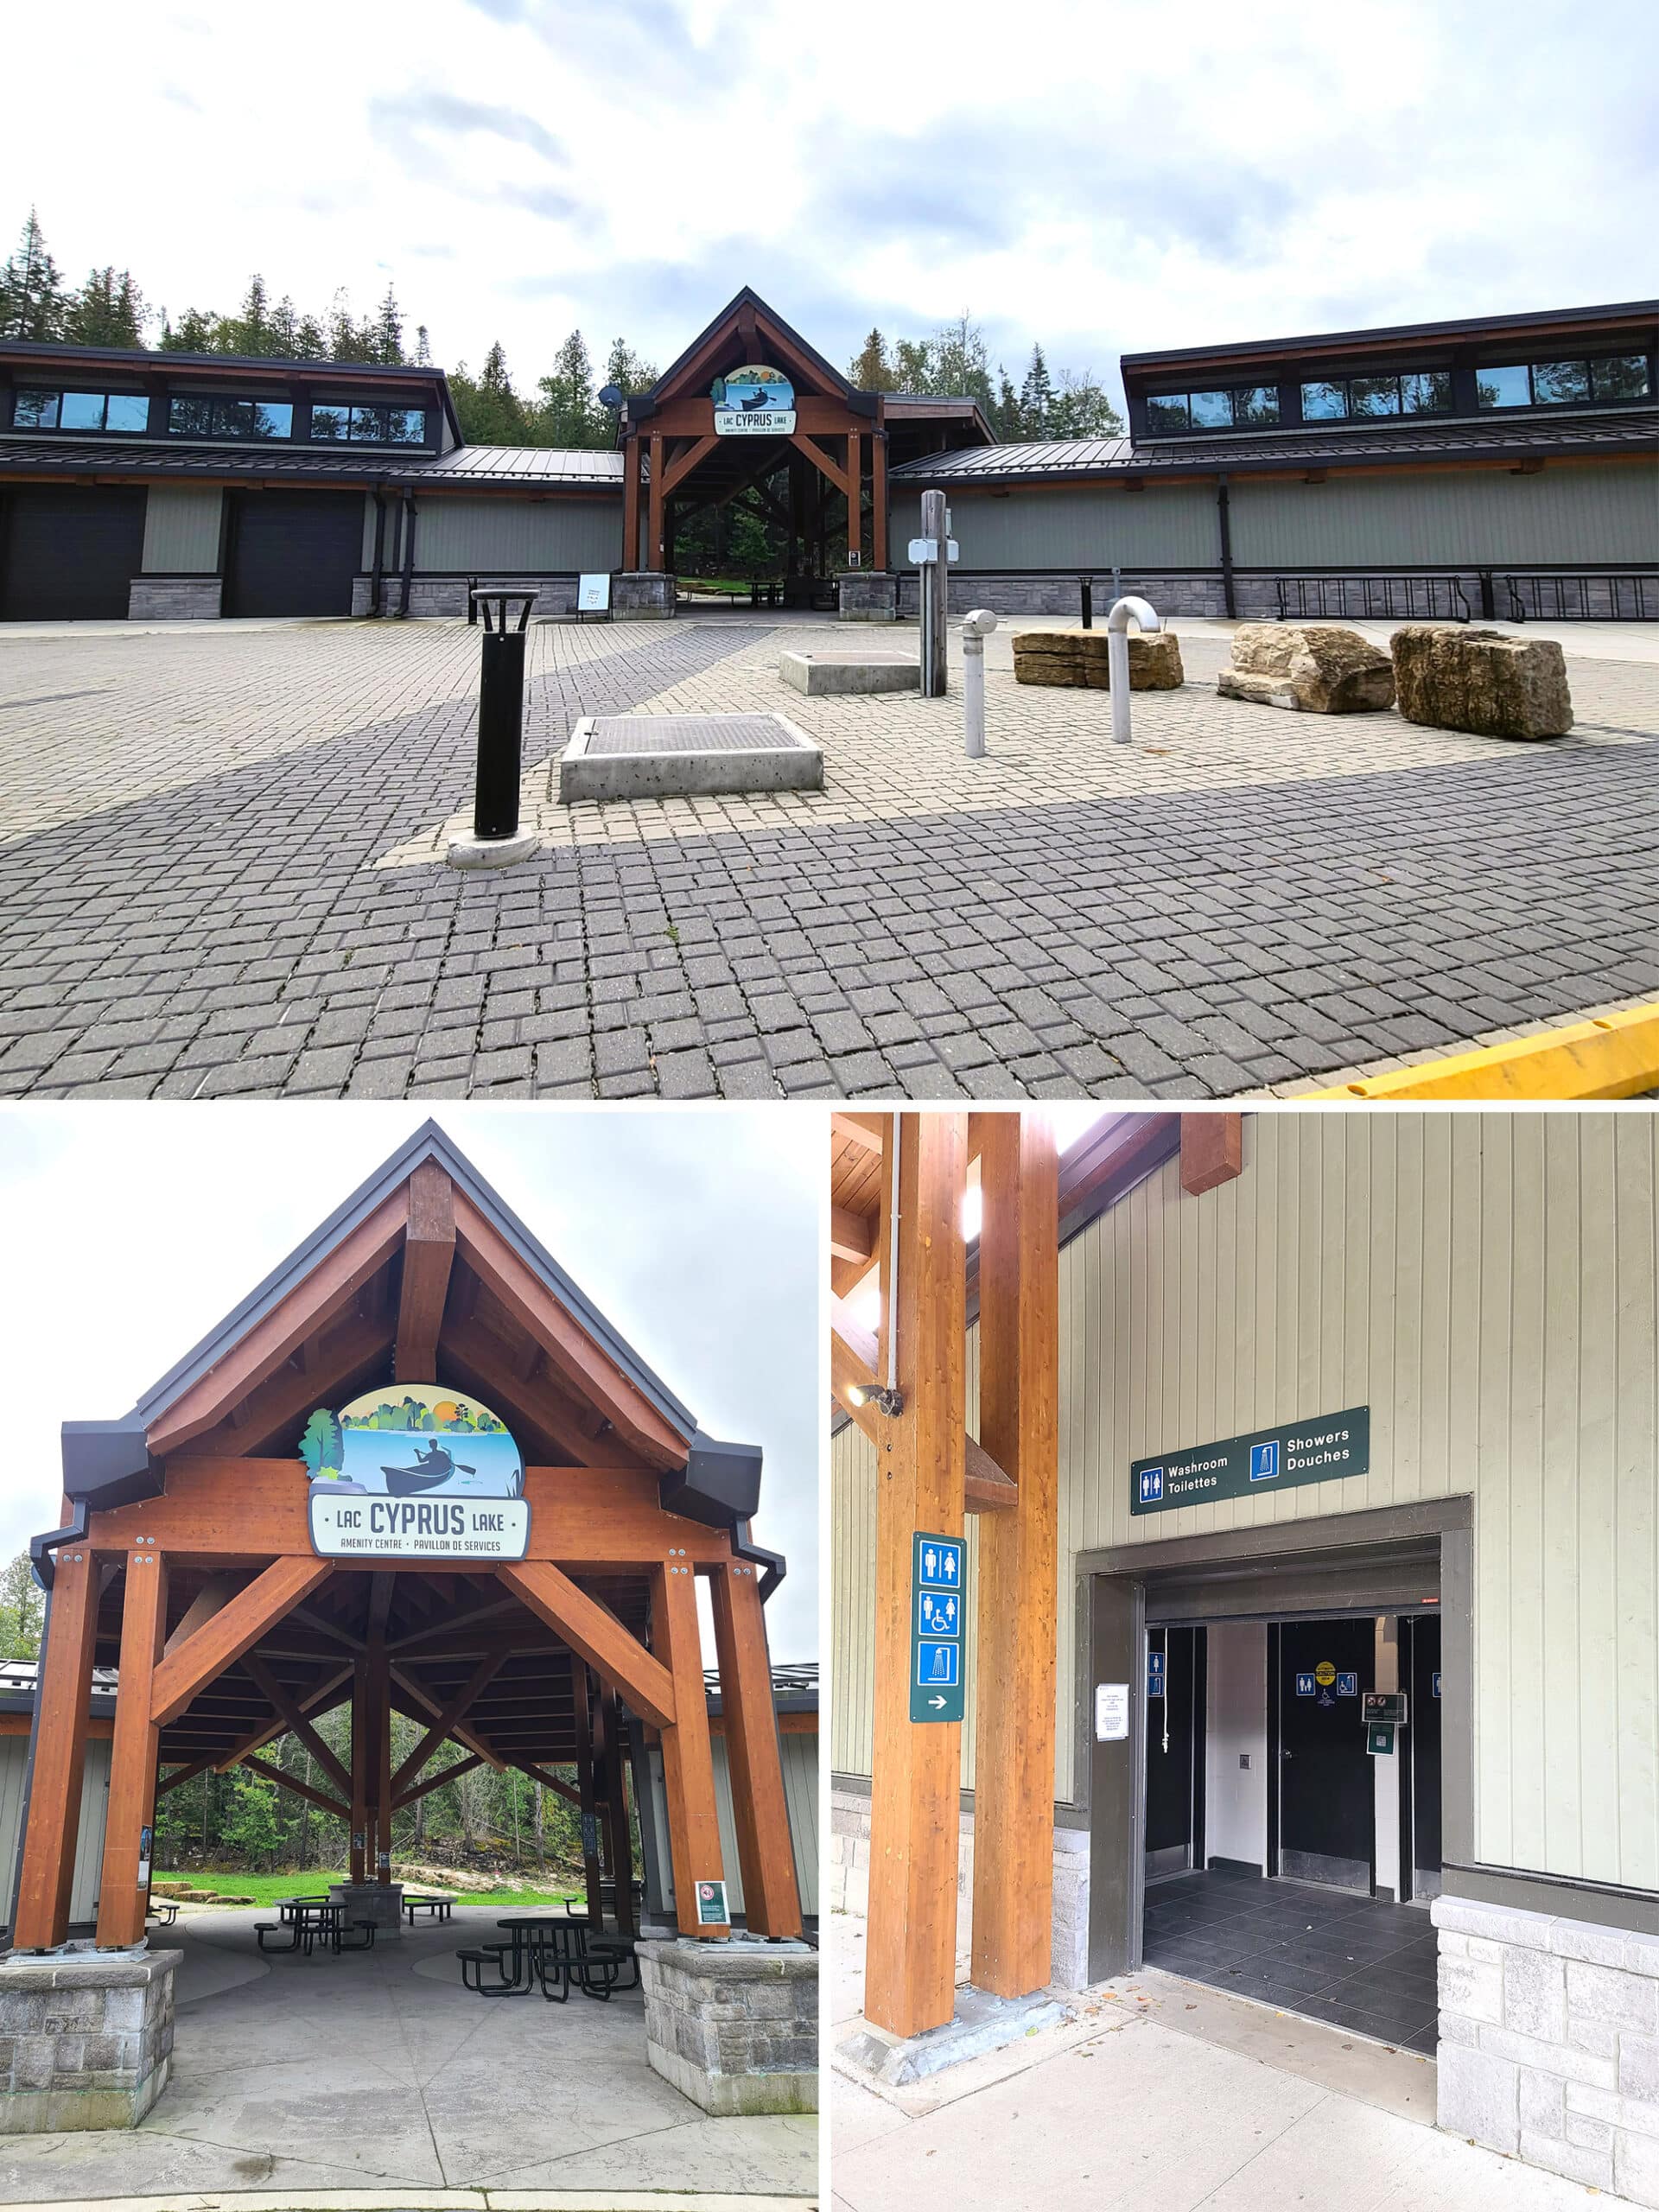 3 part image showing different views of the campground hub in bruce peninsula national park.